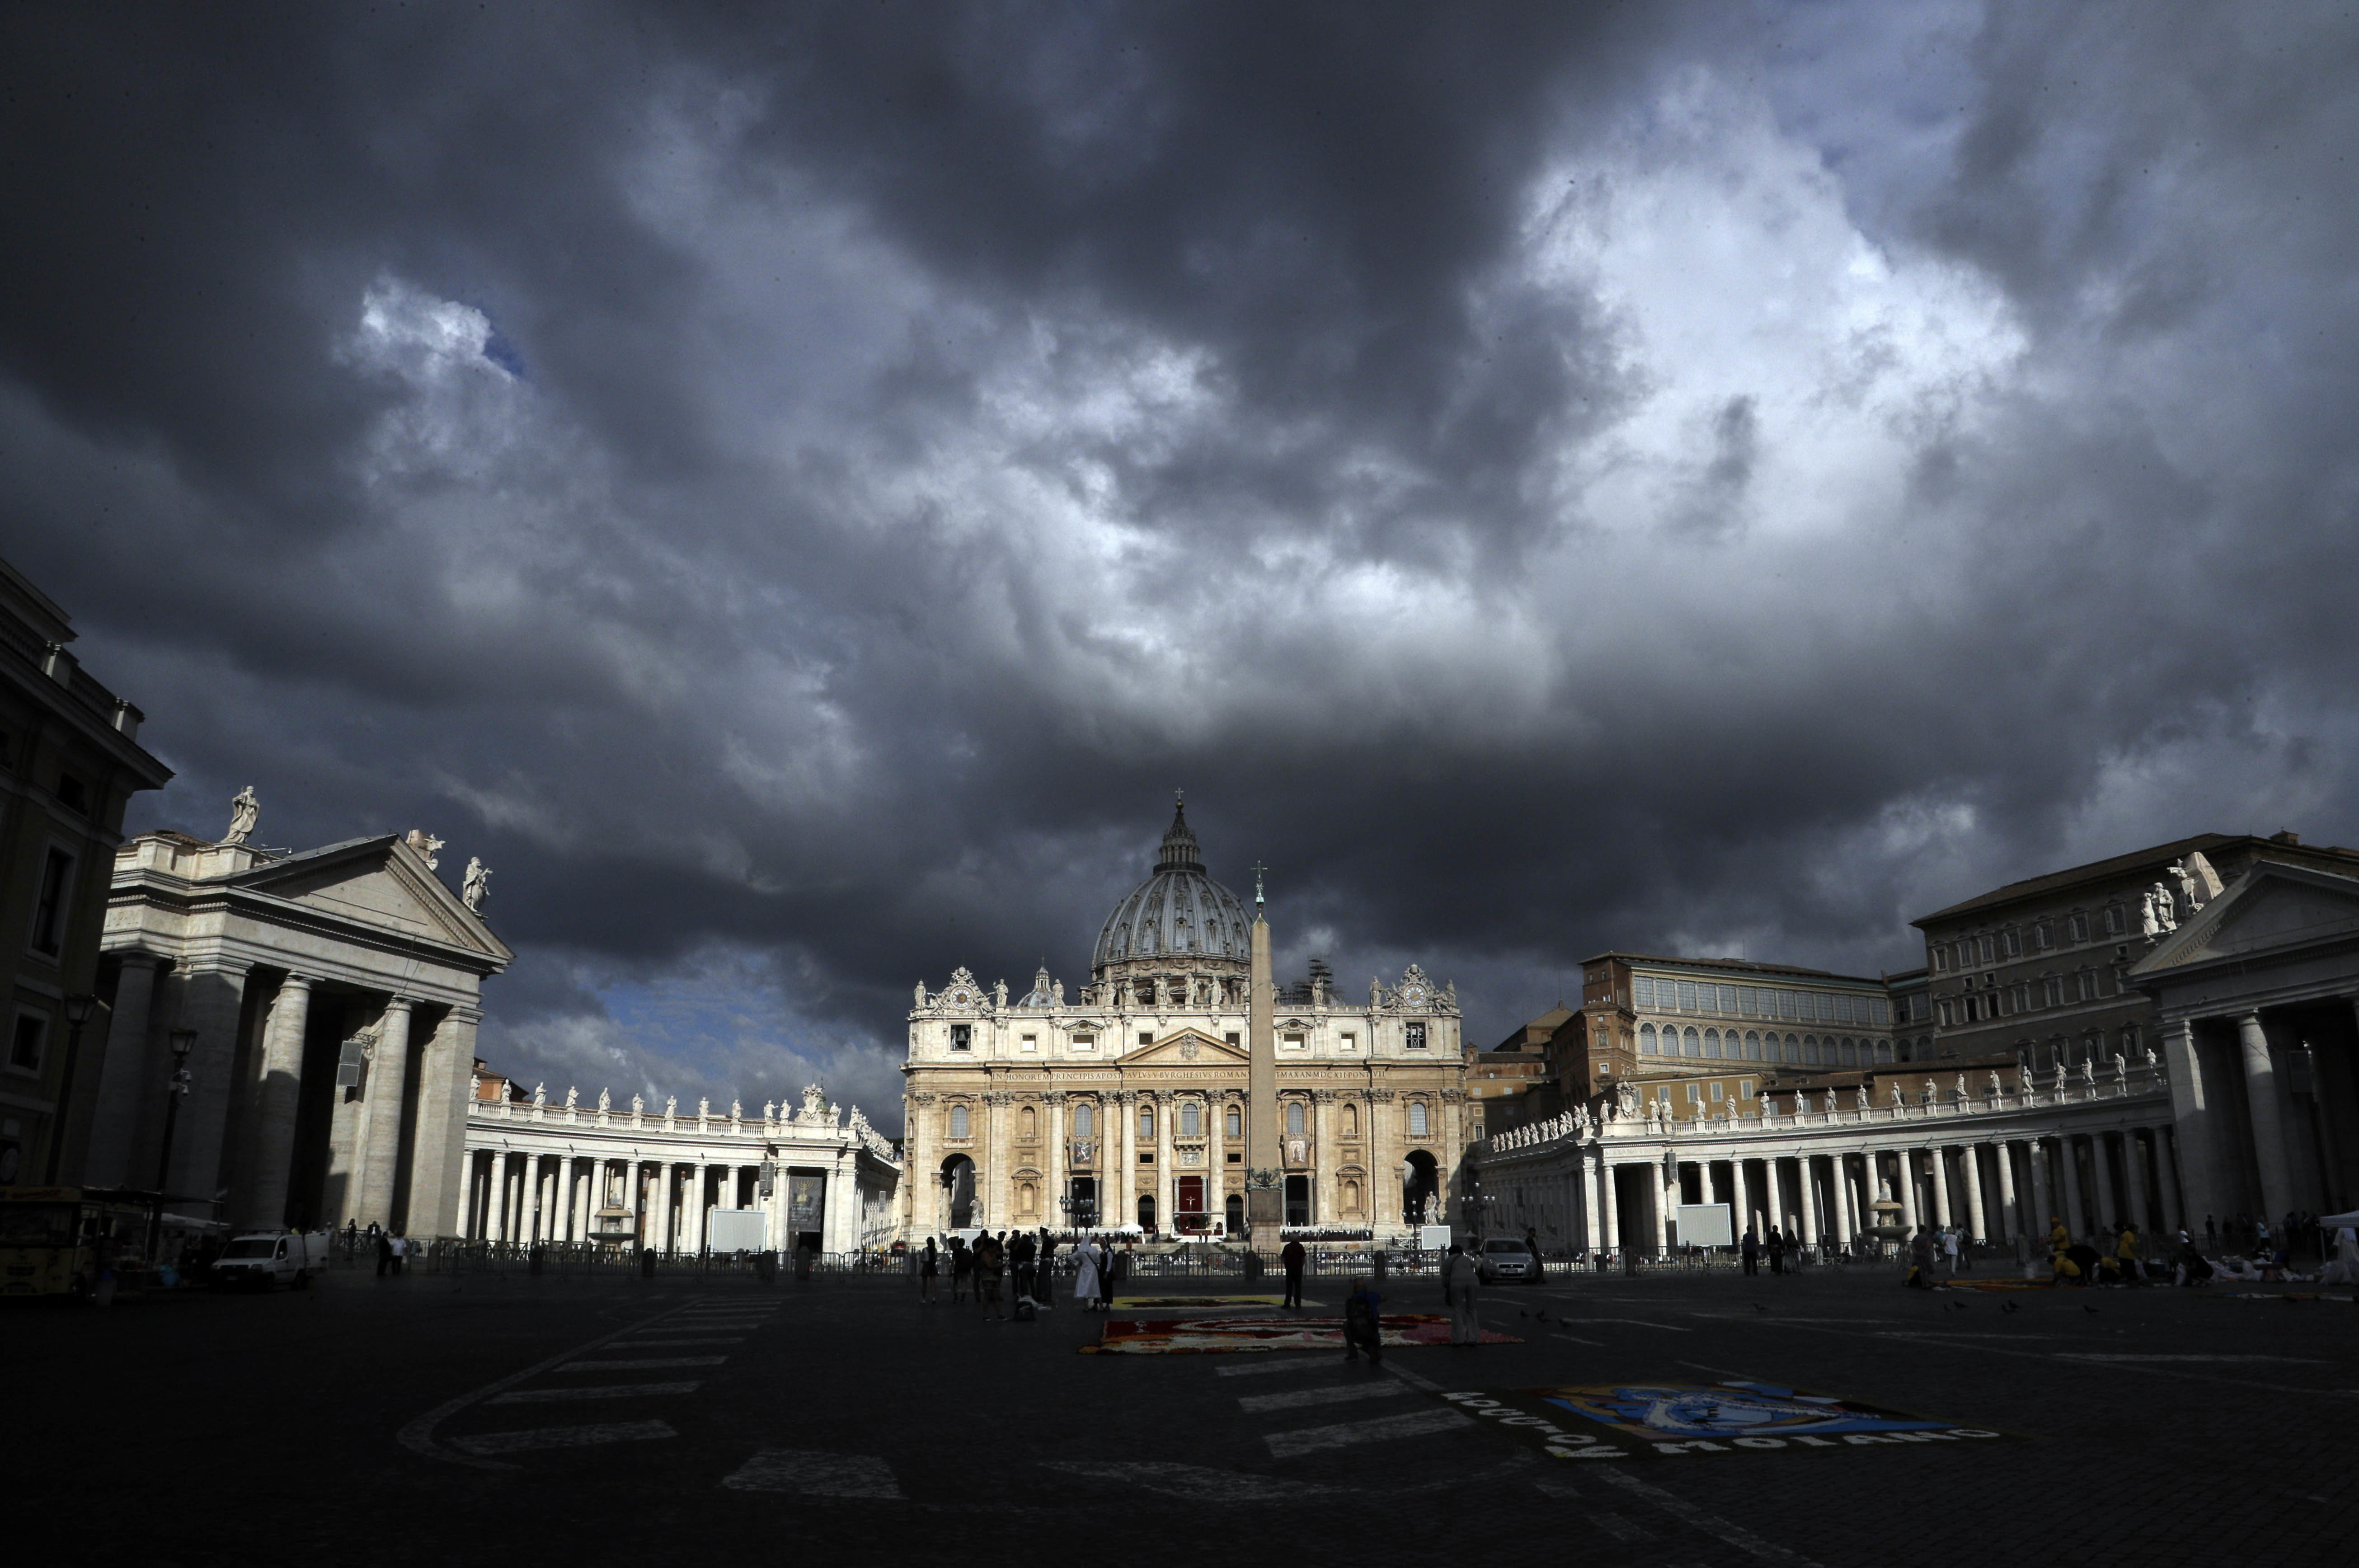 Vatican committee: Church credibility at risk over sex abuse